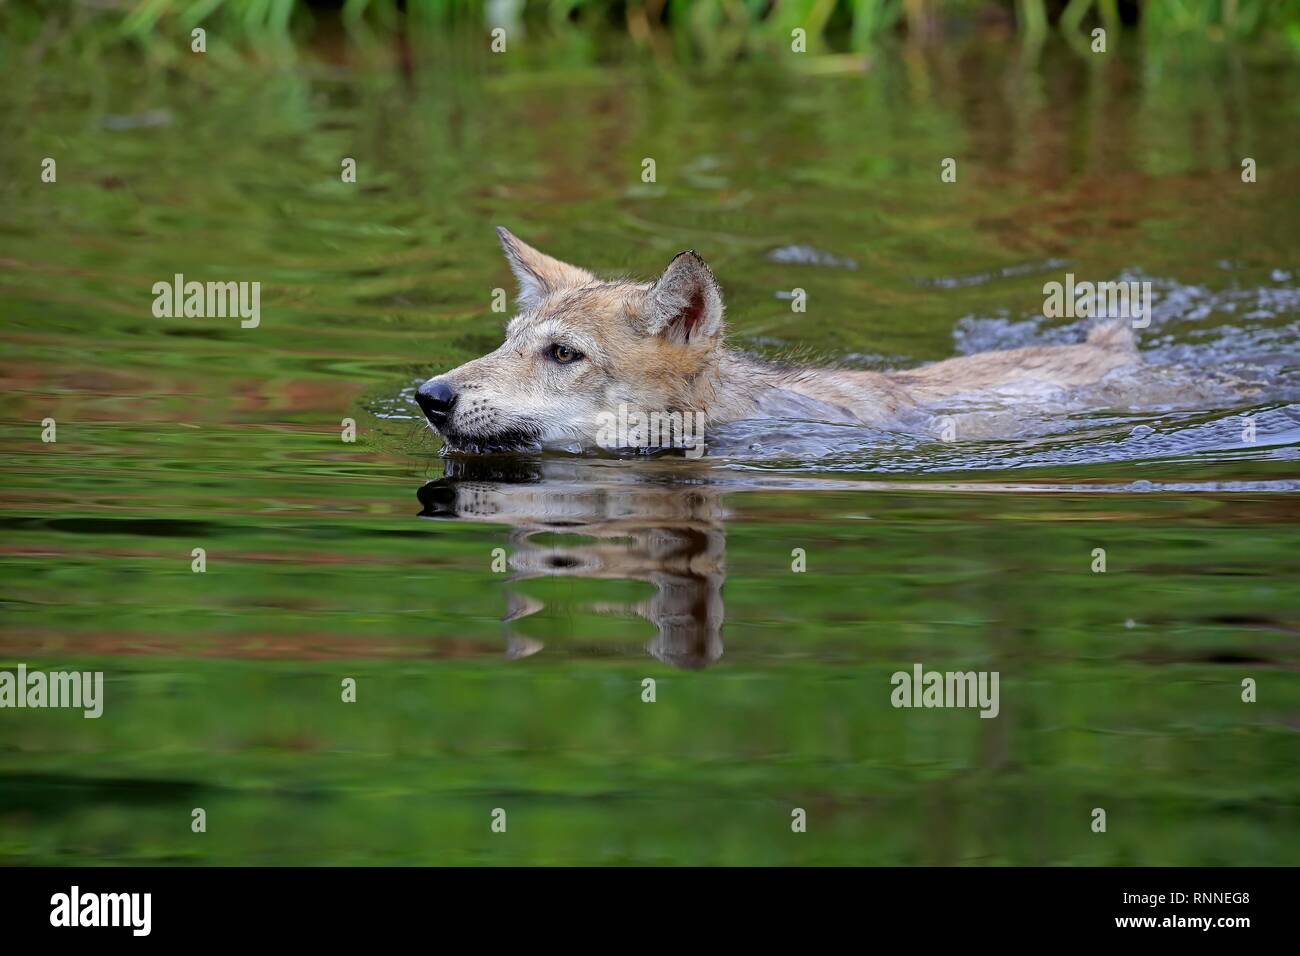 Gray wolf (Canis lupus), young animal swimming in water, Pine County, Minnesota, USA Stock Photo